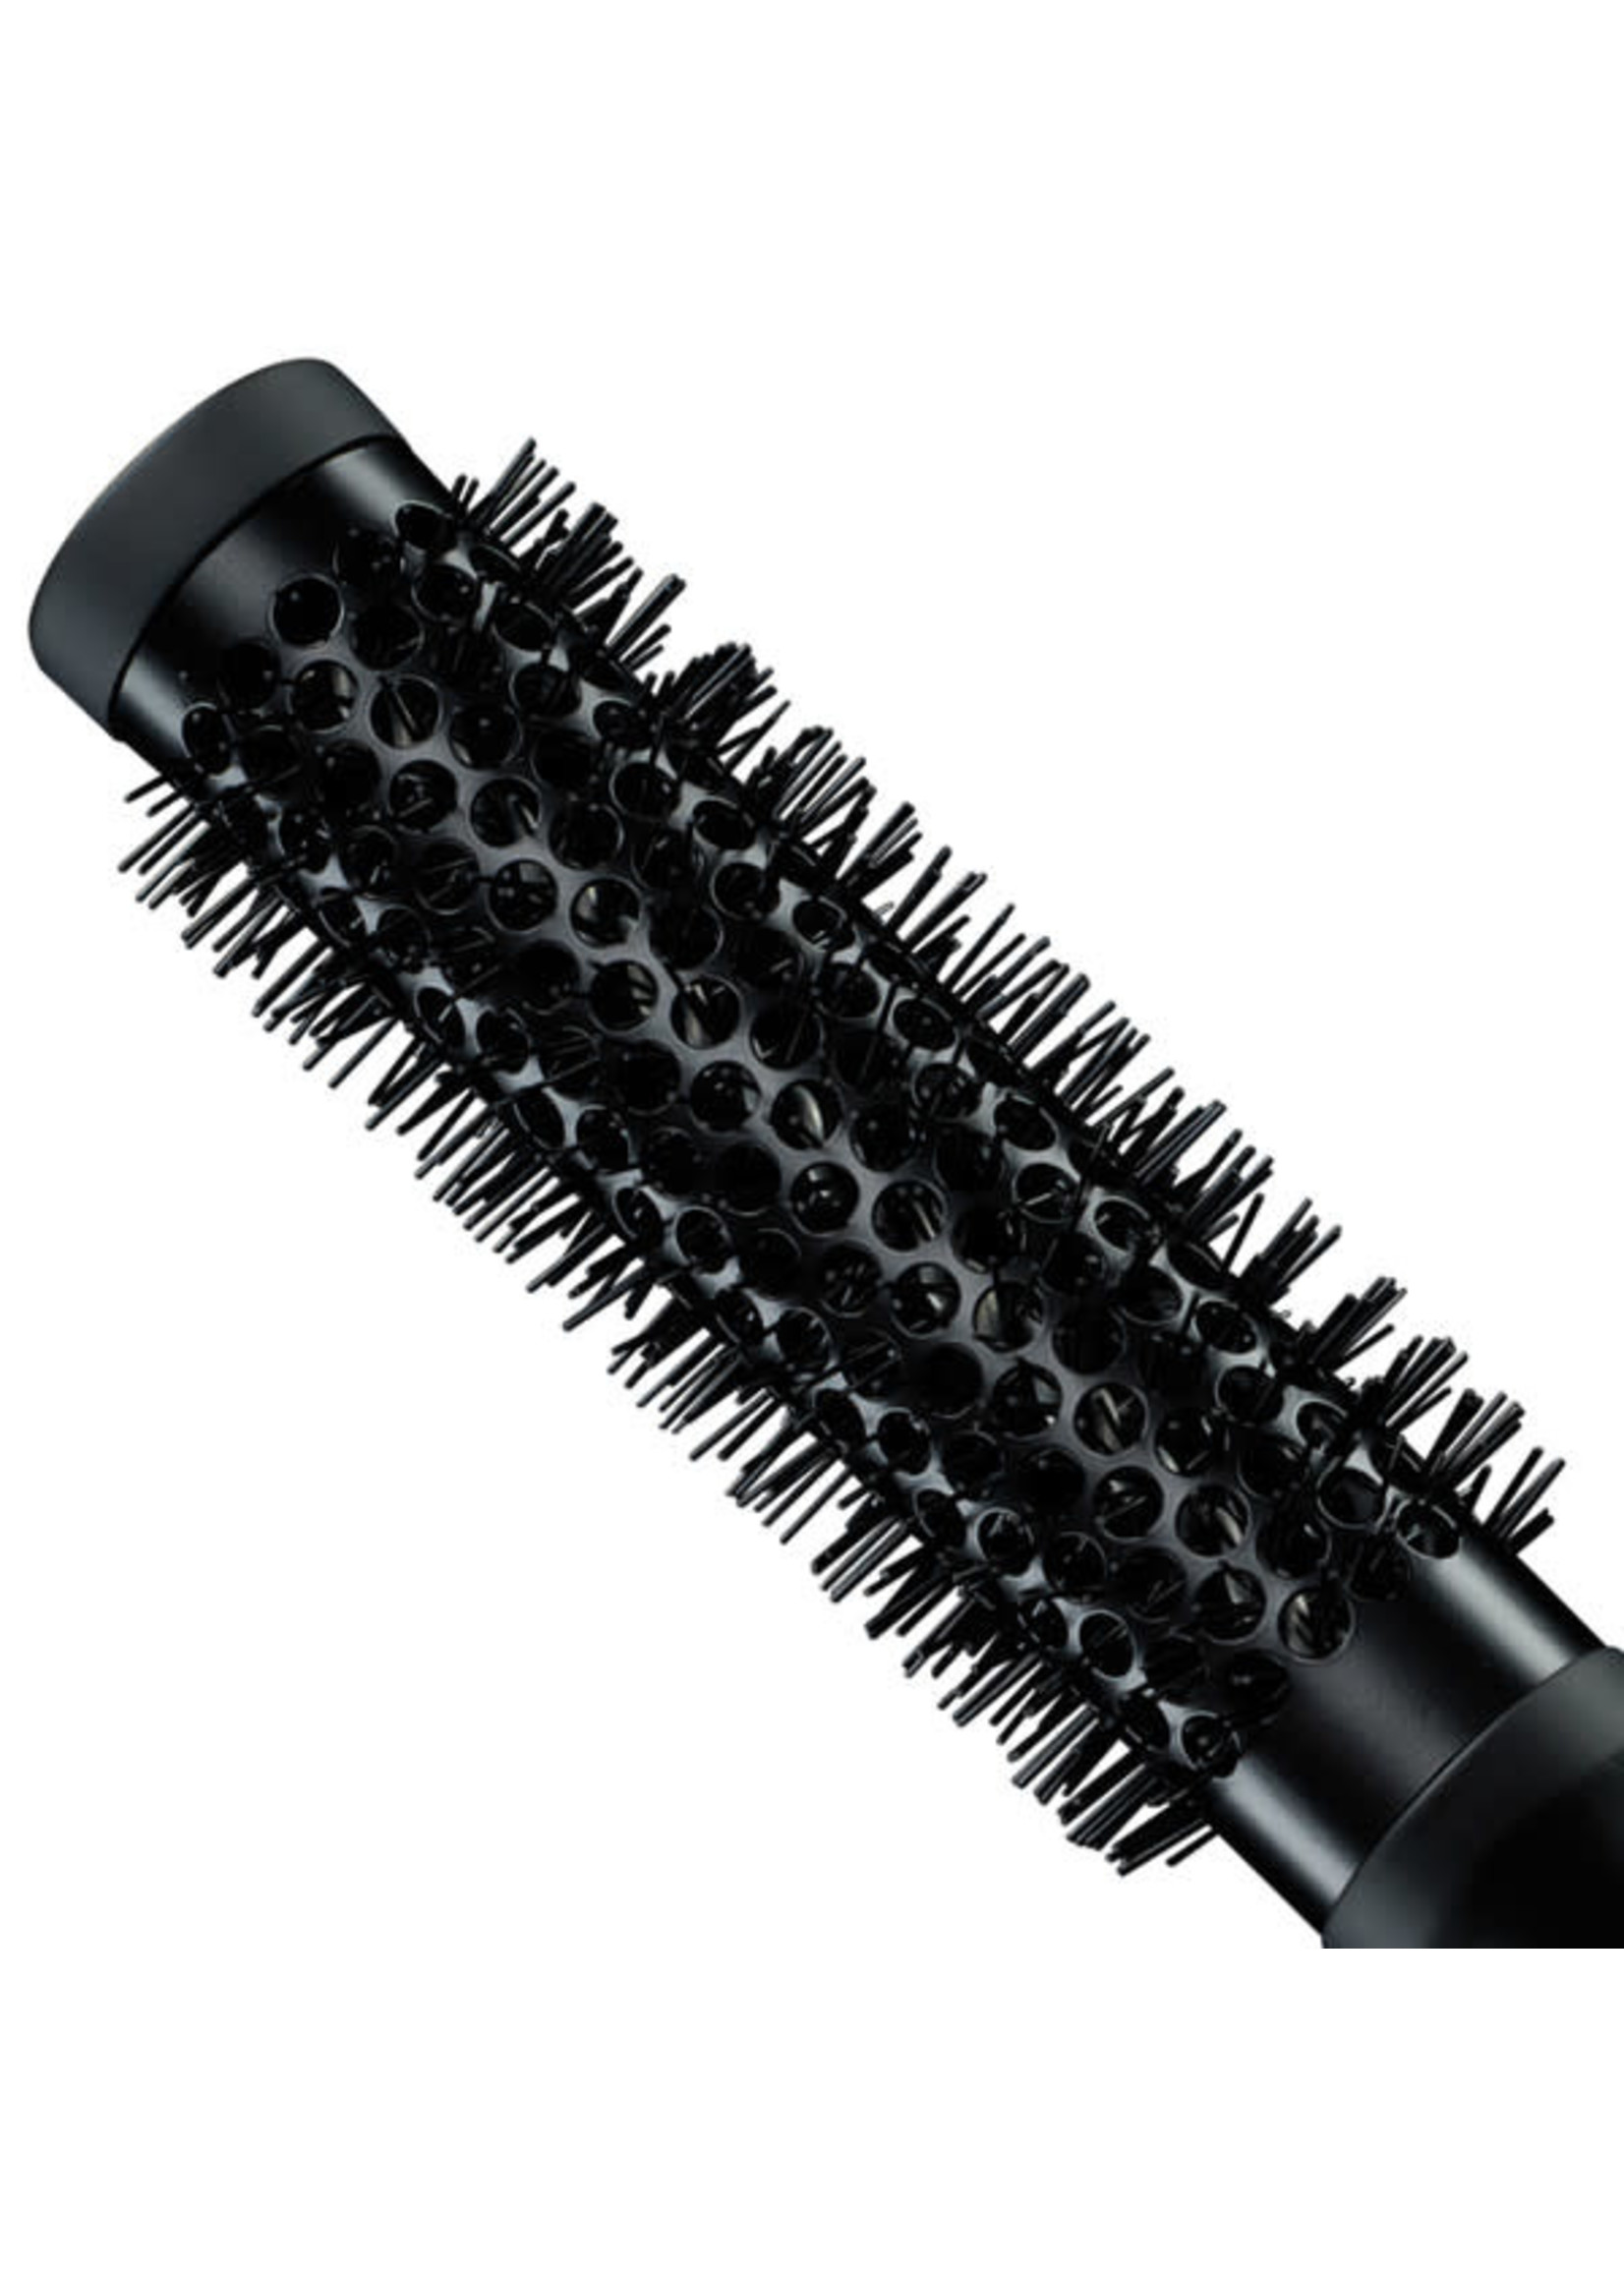 GHD GHD The Blow Dryer Ceramic Vented Radial Brush Size 1